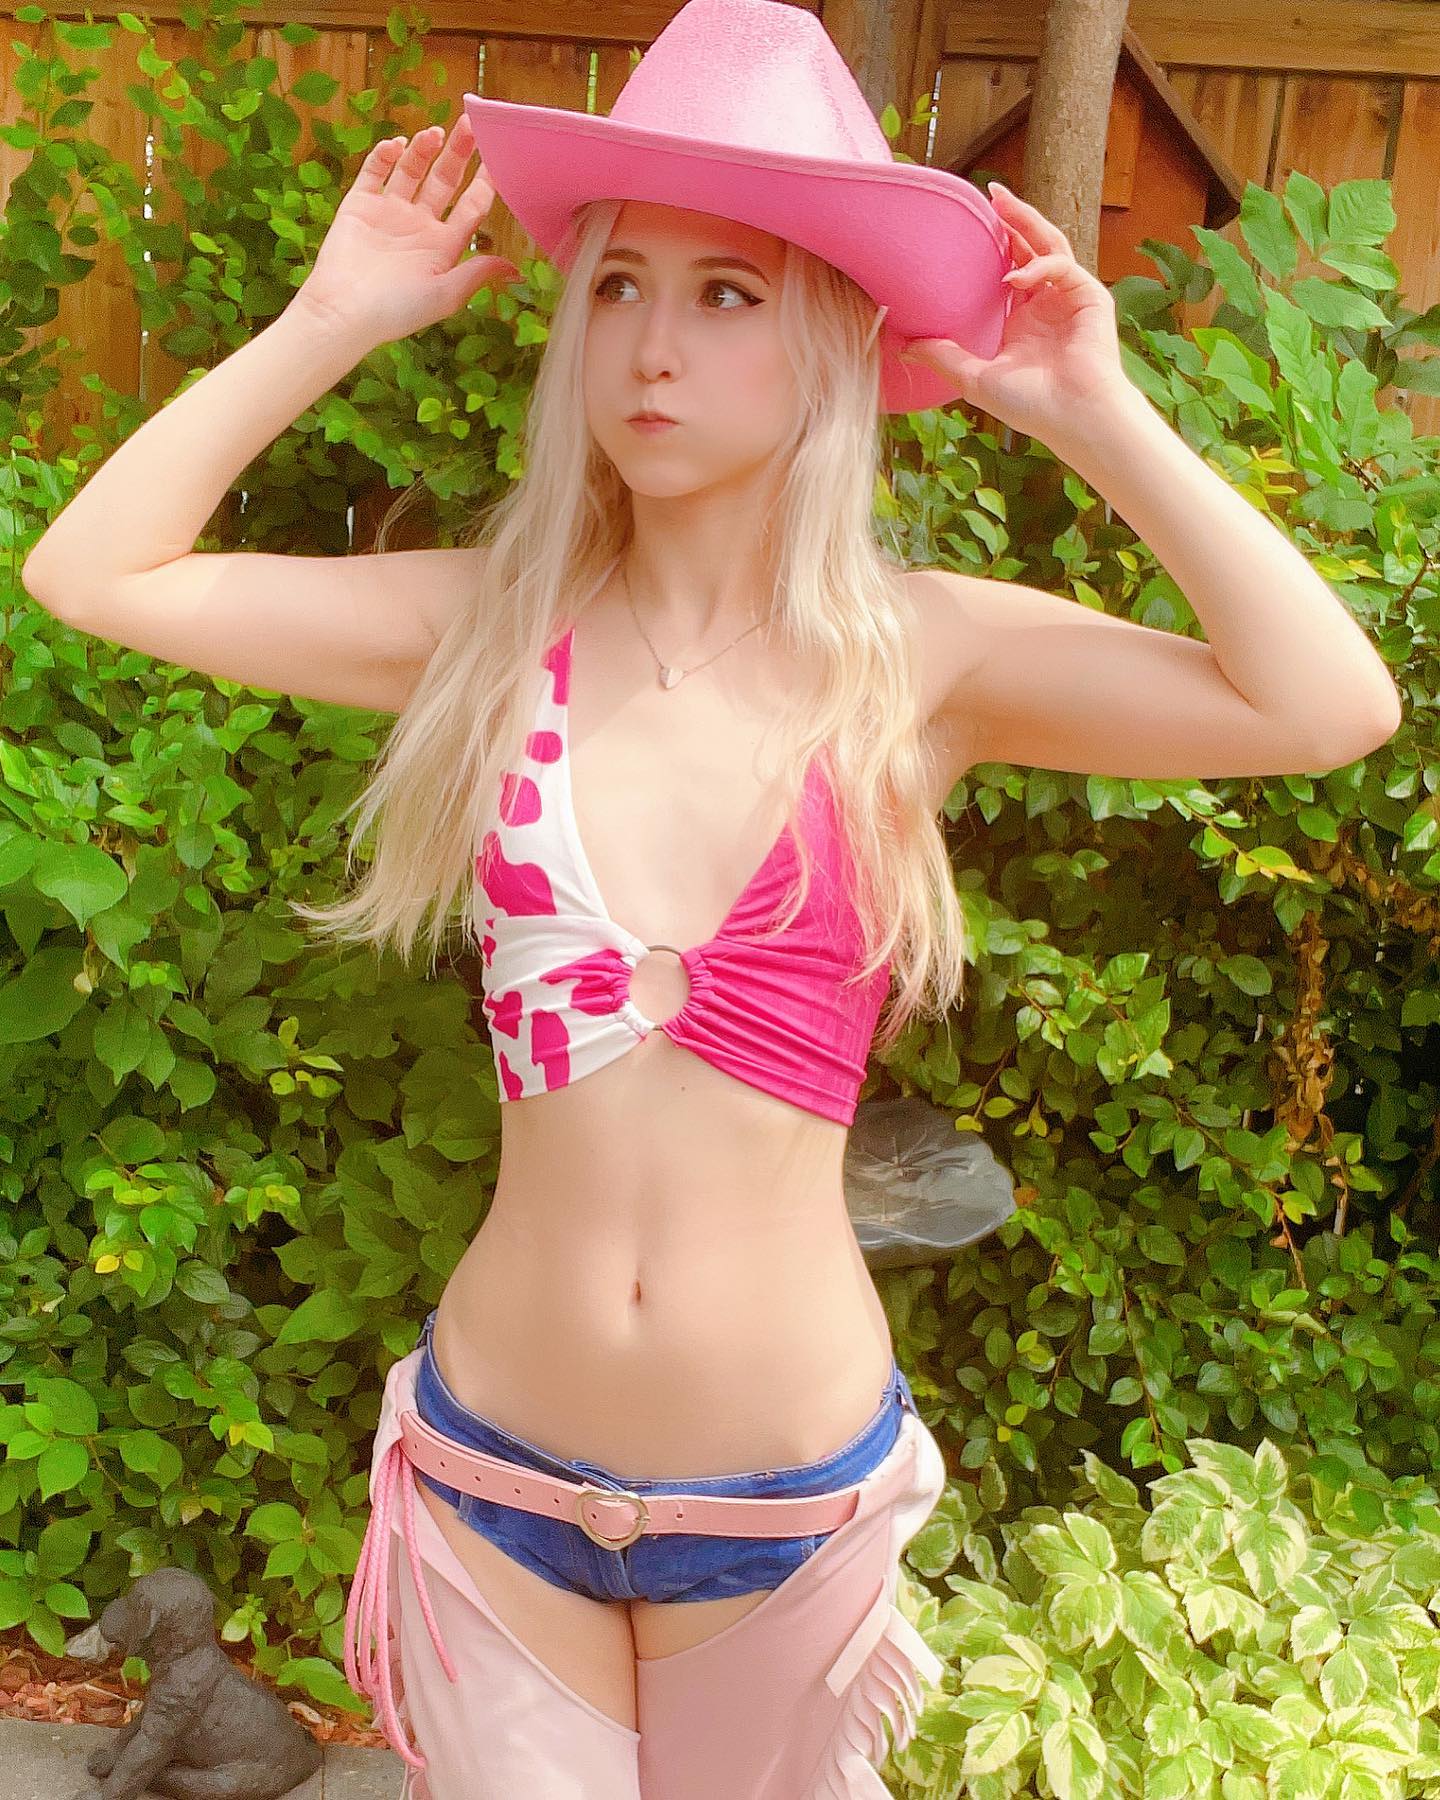 Who doesn’t like cowgirls 🤭 

did you know there is an event in my city called stampede? It goes for a week(or two I can’t remember) It’s all things western like rodeo and cowboy stuff! It’s also a carnival with fun games and food~ sad I can’t go this year (to save money since it can be pricy$$$) also heads east to make dizzy still. But it can be a fun event!